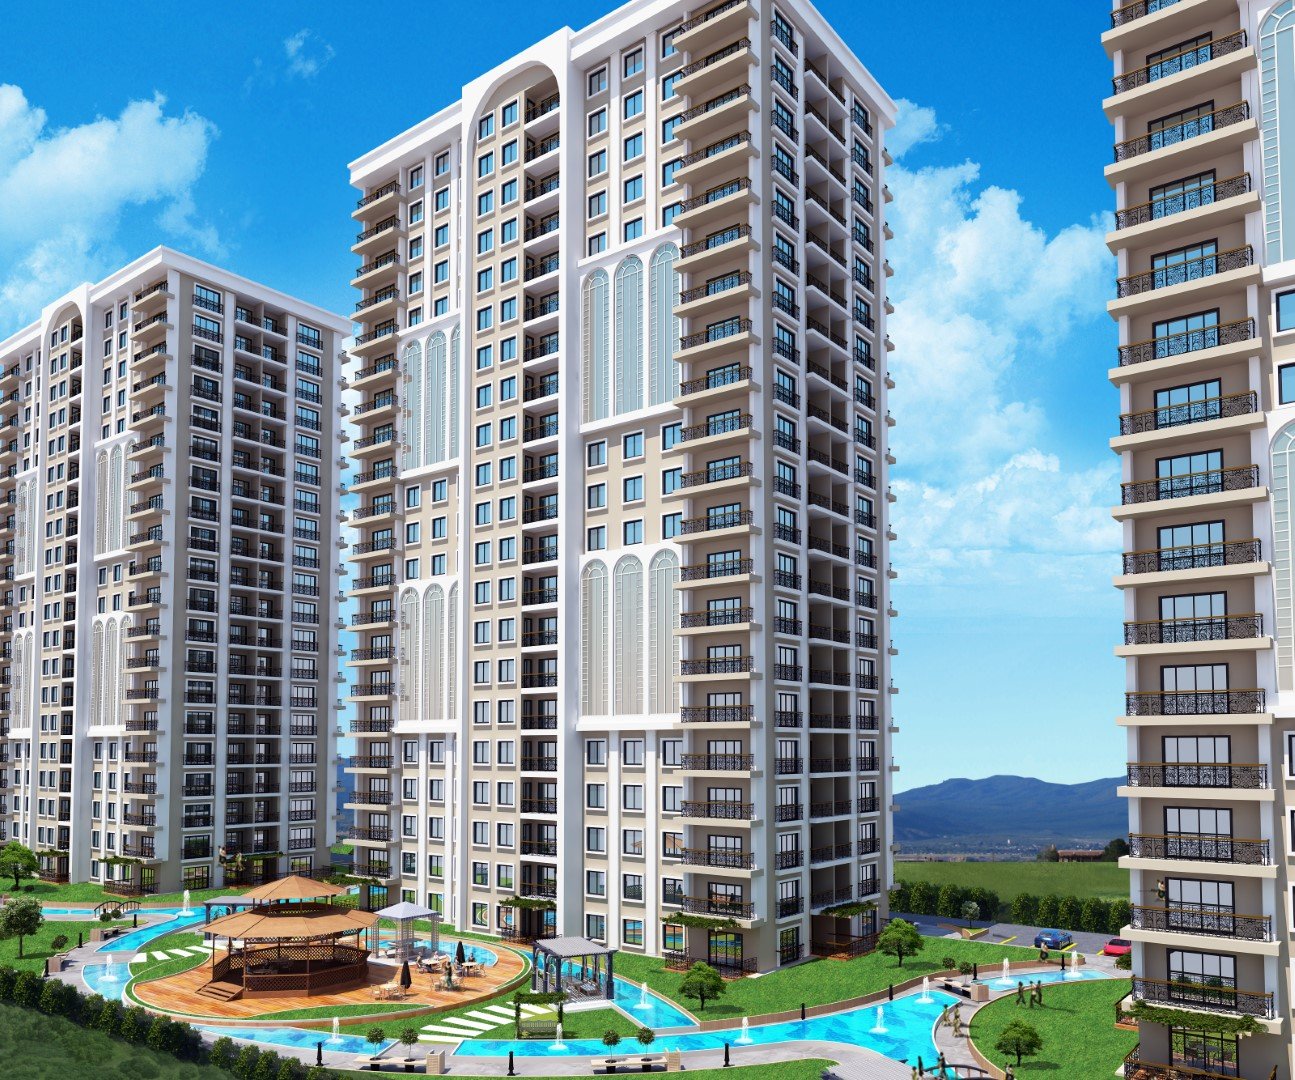 Modern apartments with smart technology for investment and living 2